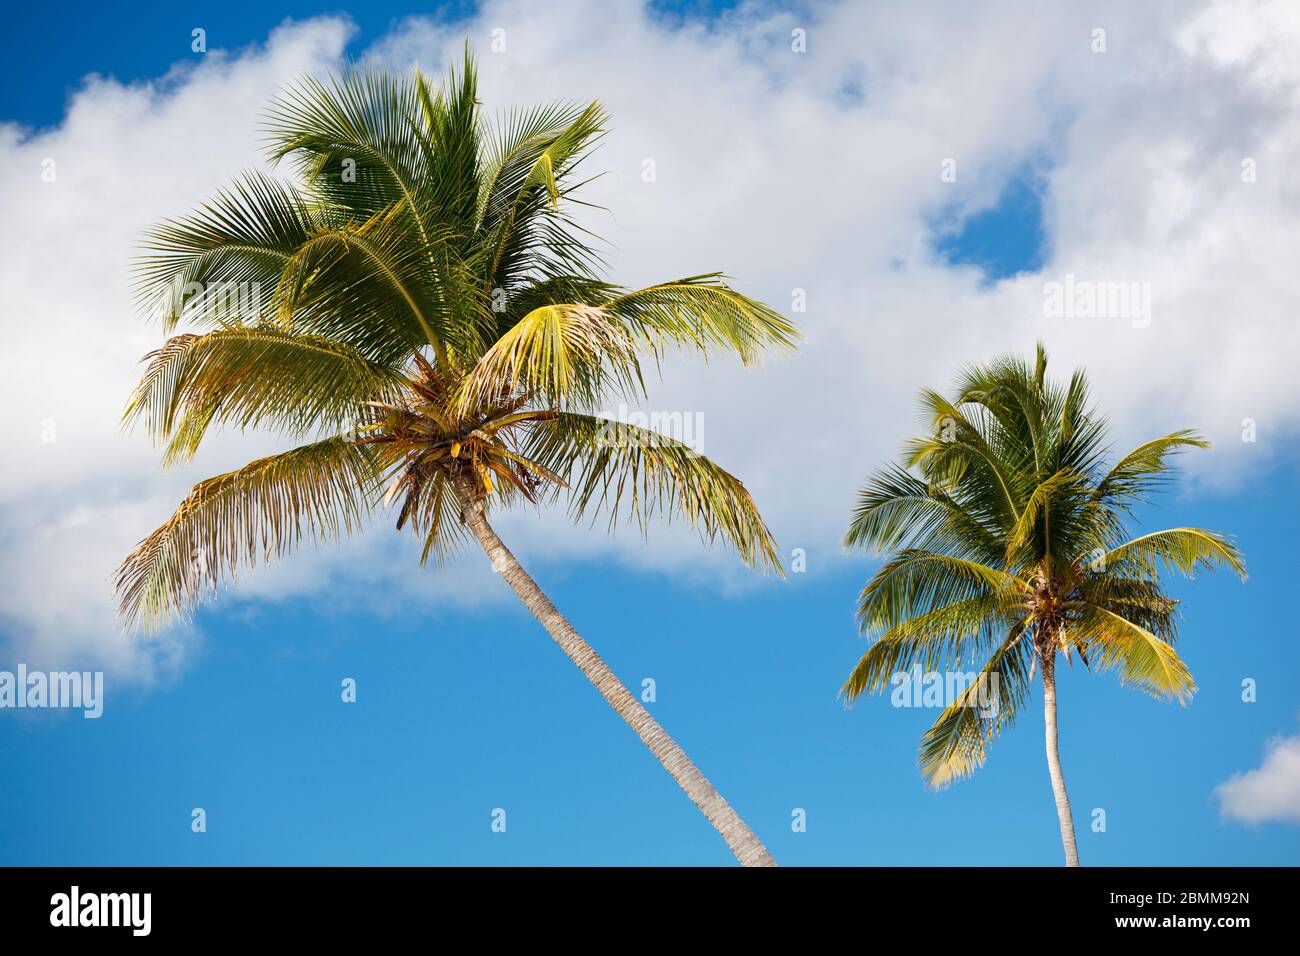 Two coconut palm trees in front of blue sky. Stock Photo